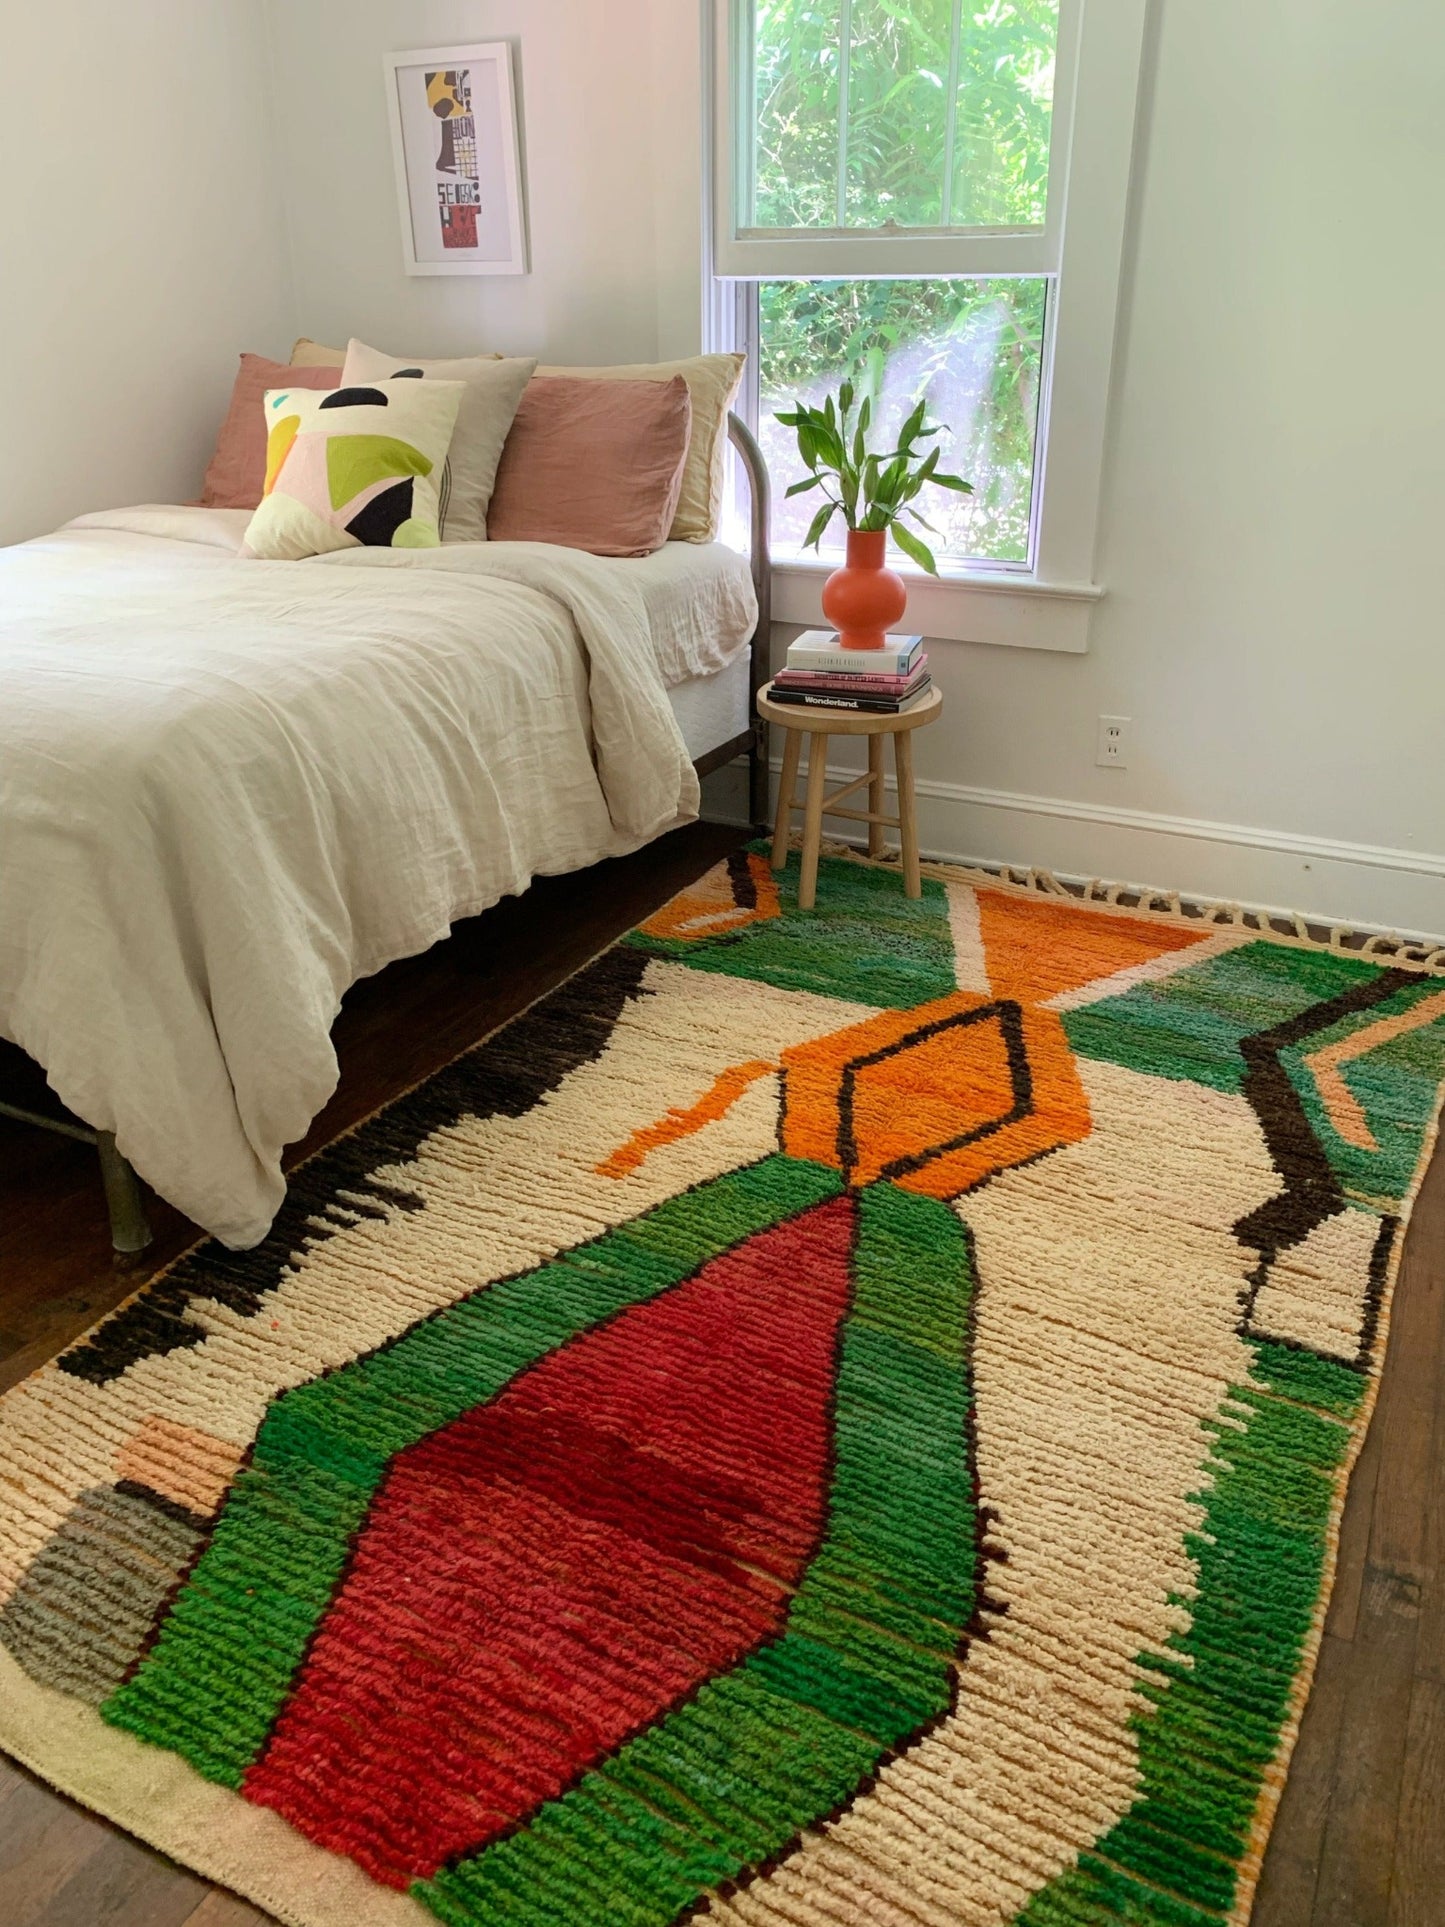 Grassy green, cream, carmine, and tangerine abstract Moroccan rug looks lovely next to an orange vase of lillies.